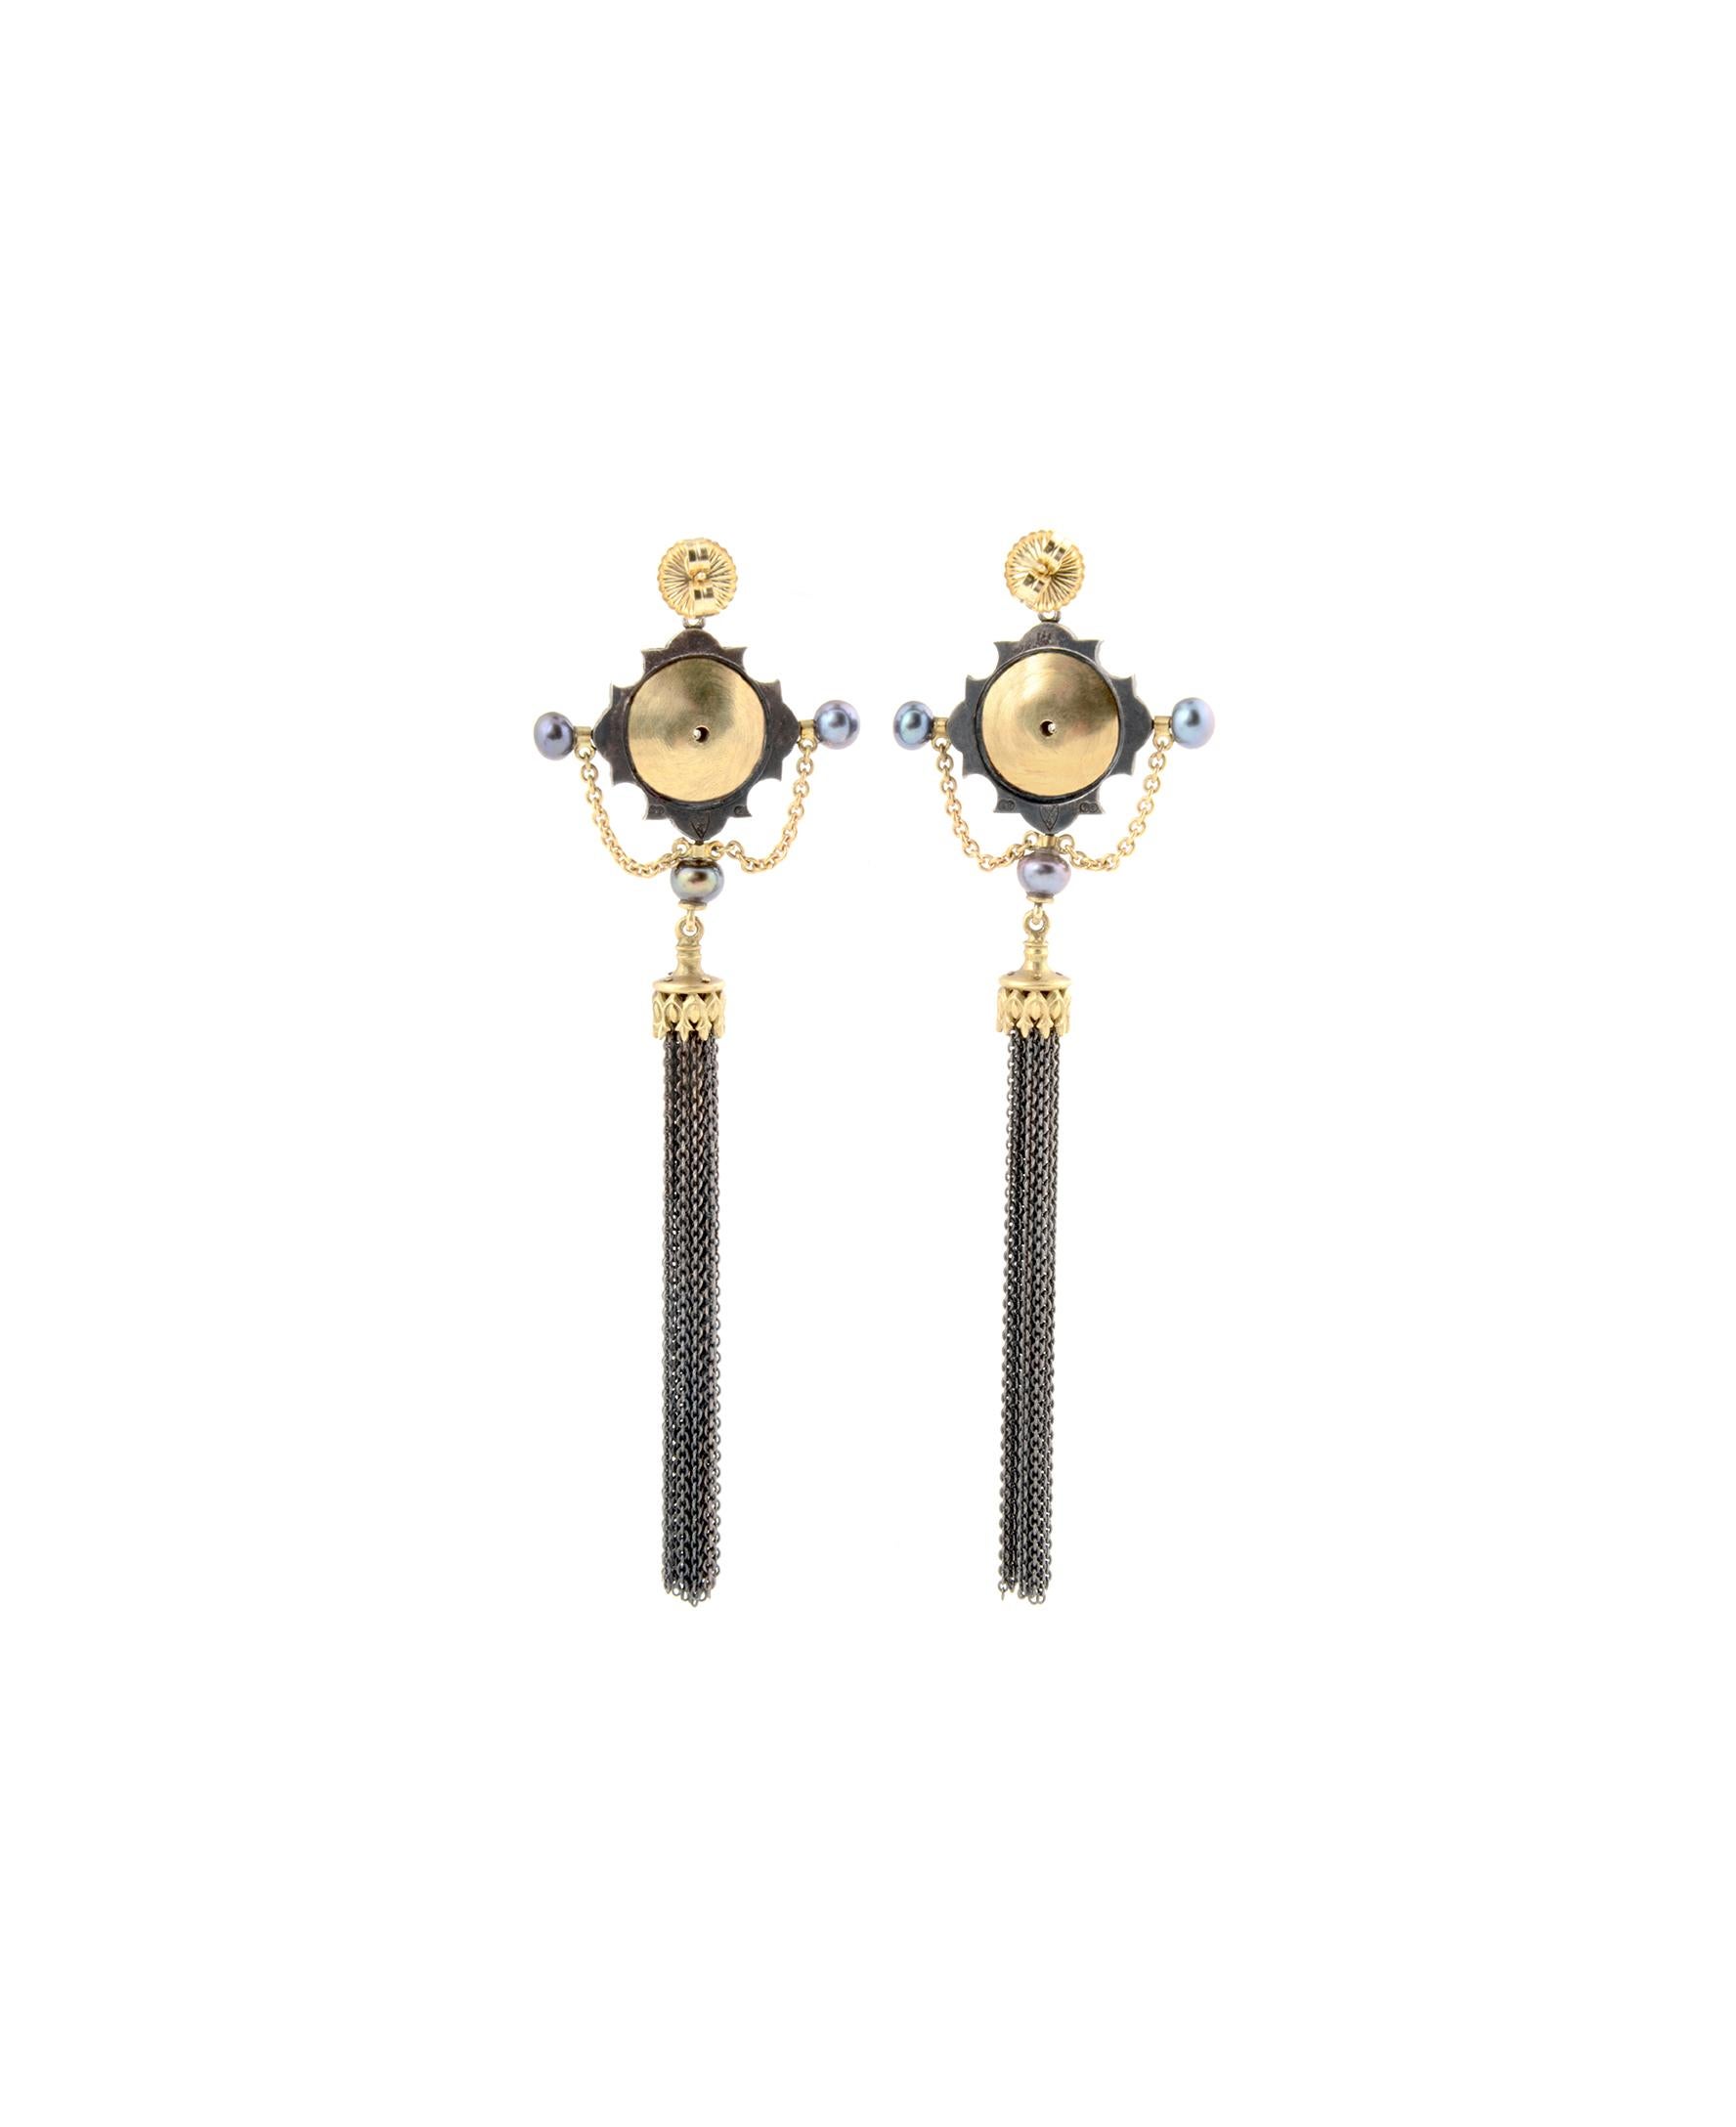 LUXURIANT TASSEL EARRINGS

The Luxuriant Tassel Earrings are one of a kind.

Handcrafted in 18kt yellow gold and sterling silver each earring features a vibrant, diamond which is flanked by four, stunning rubies. To complete these luminous earrings